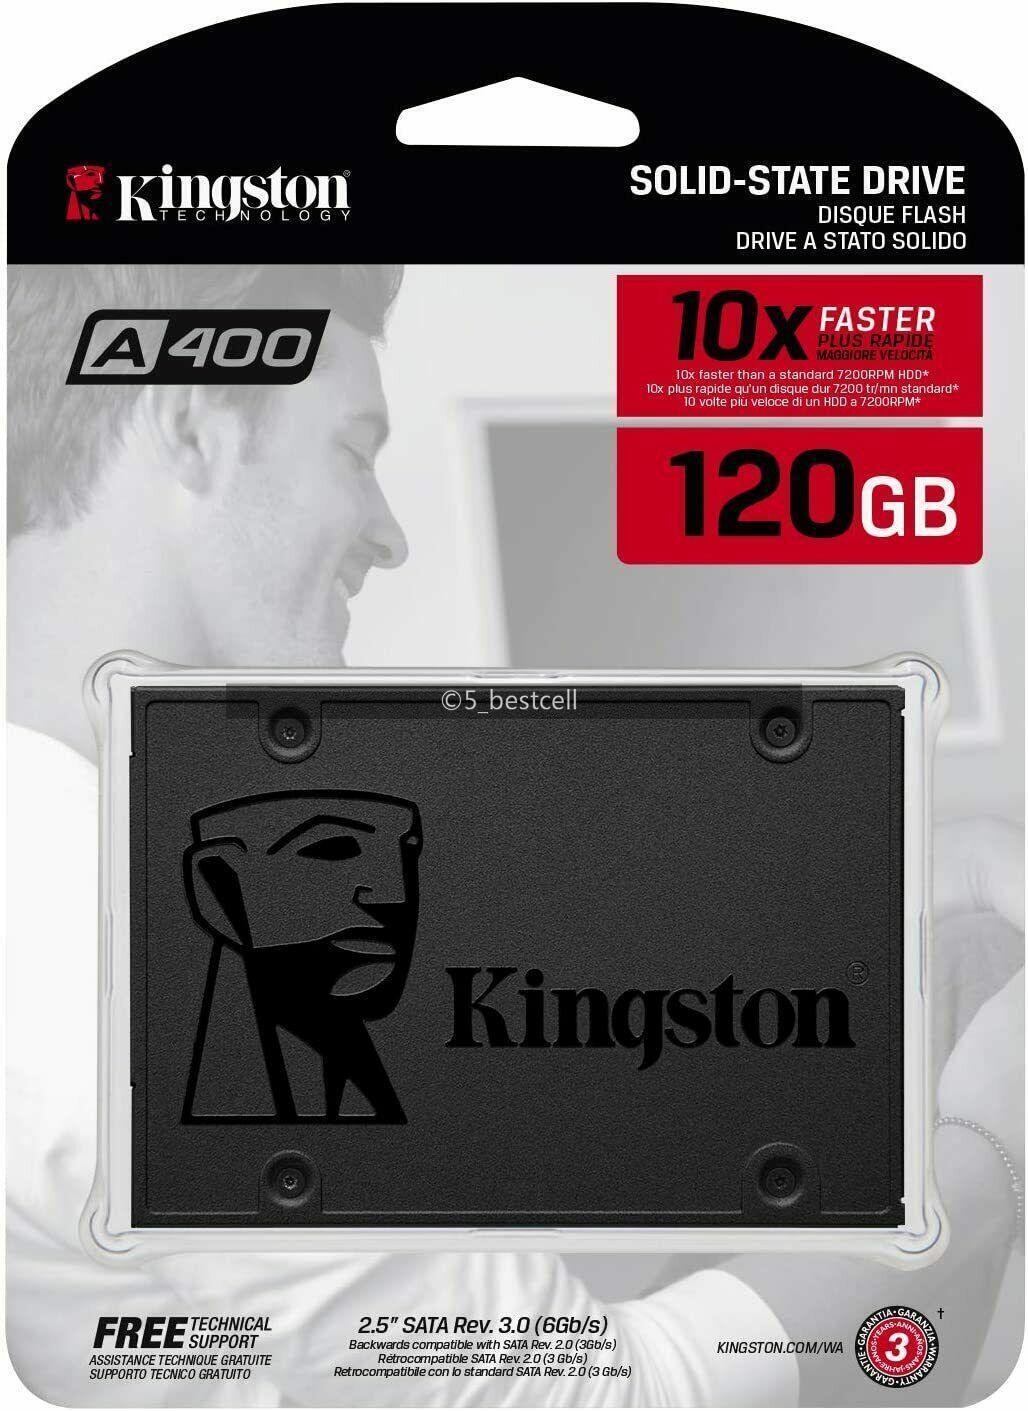 Kingston 120GB 240GB SSD SATA III 2.5 inch Solid State Drive A400 For Desktop US